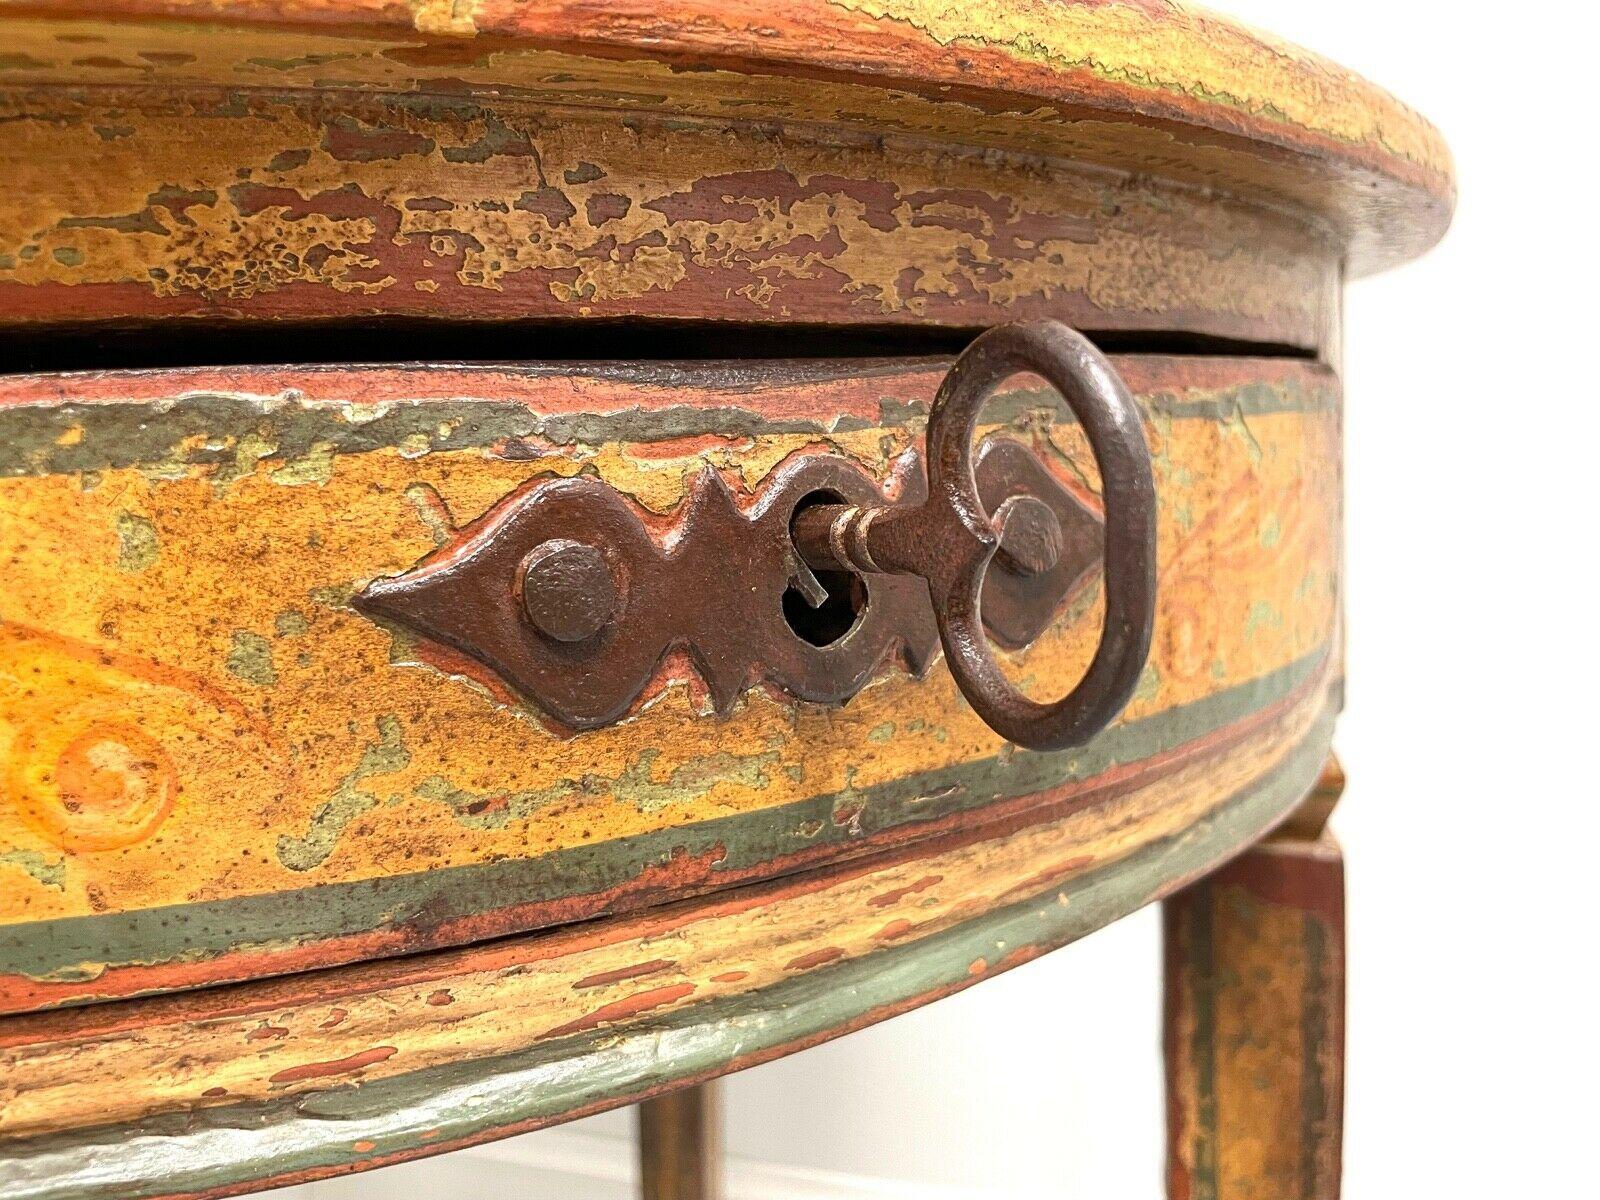 18th Century and Earlier Antique 18th Century Hand Painted Round Accent Table For Sale